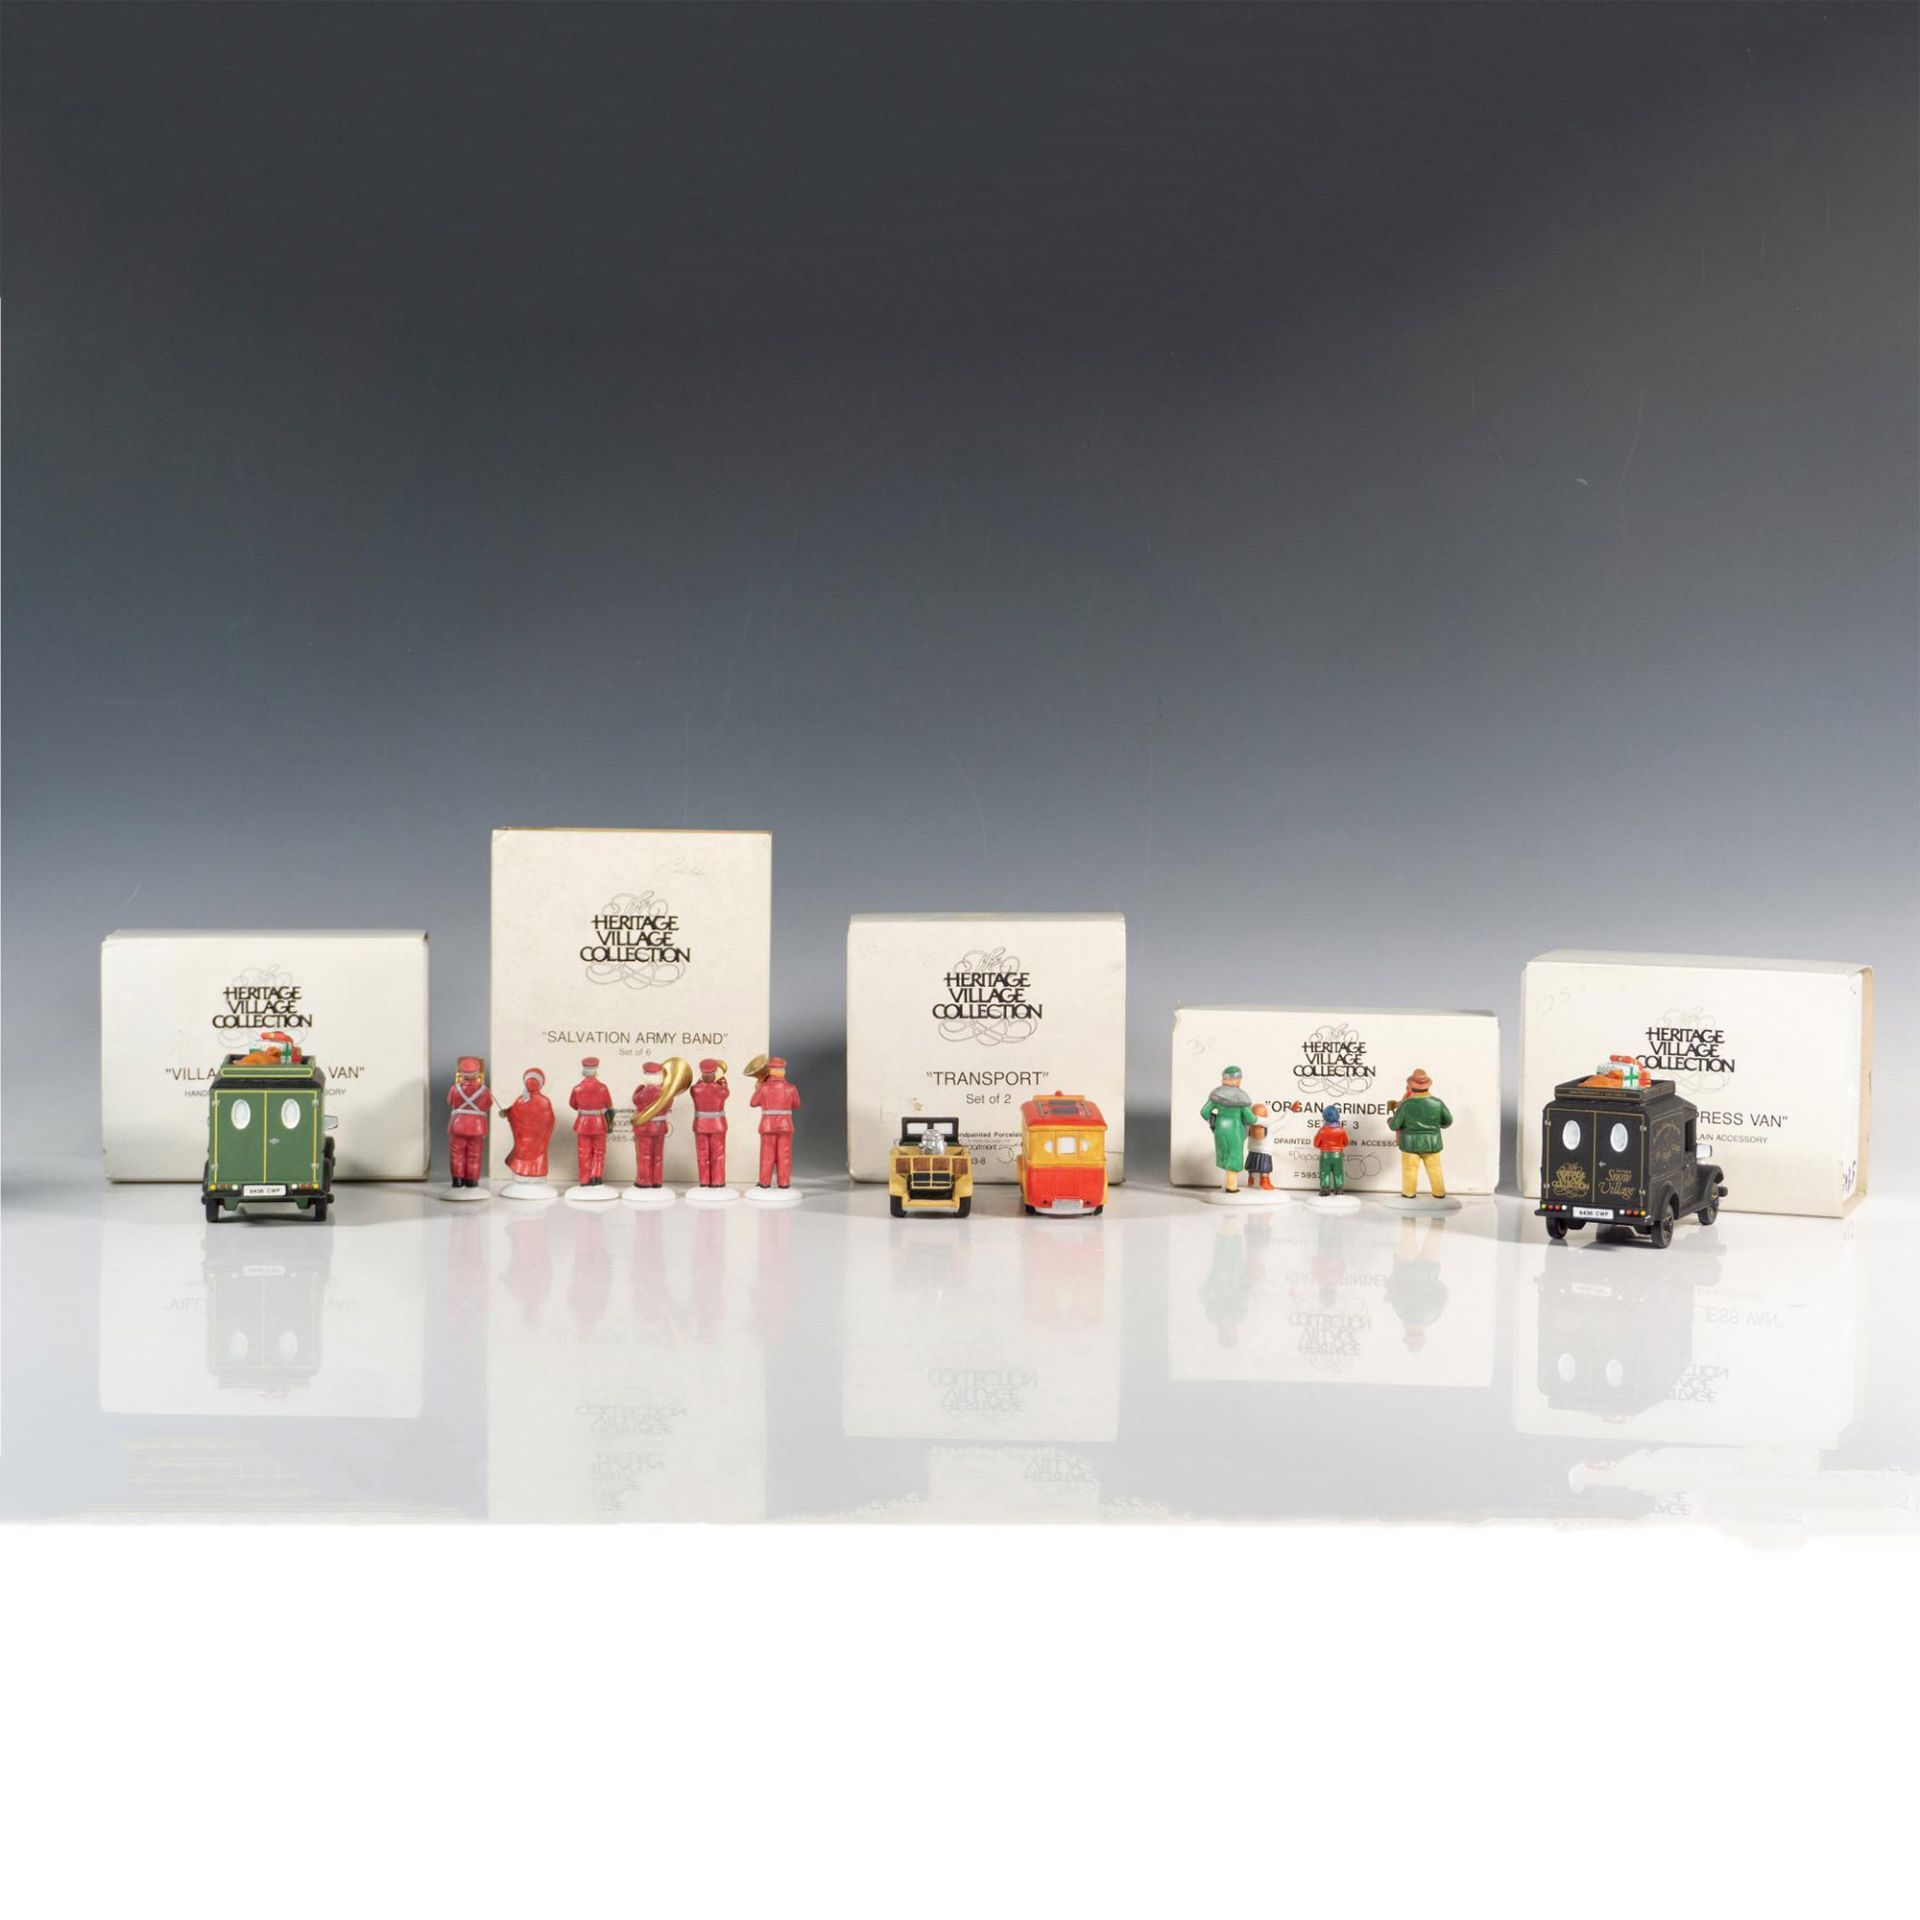 13pc Department 56 Heritage Village Collection Figurines - Image 2 of 3